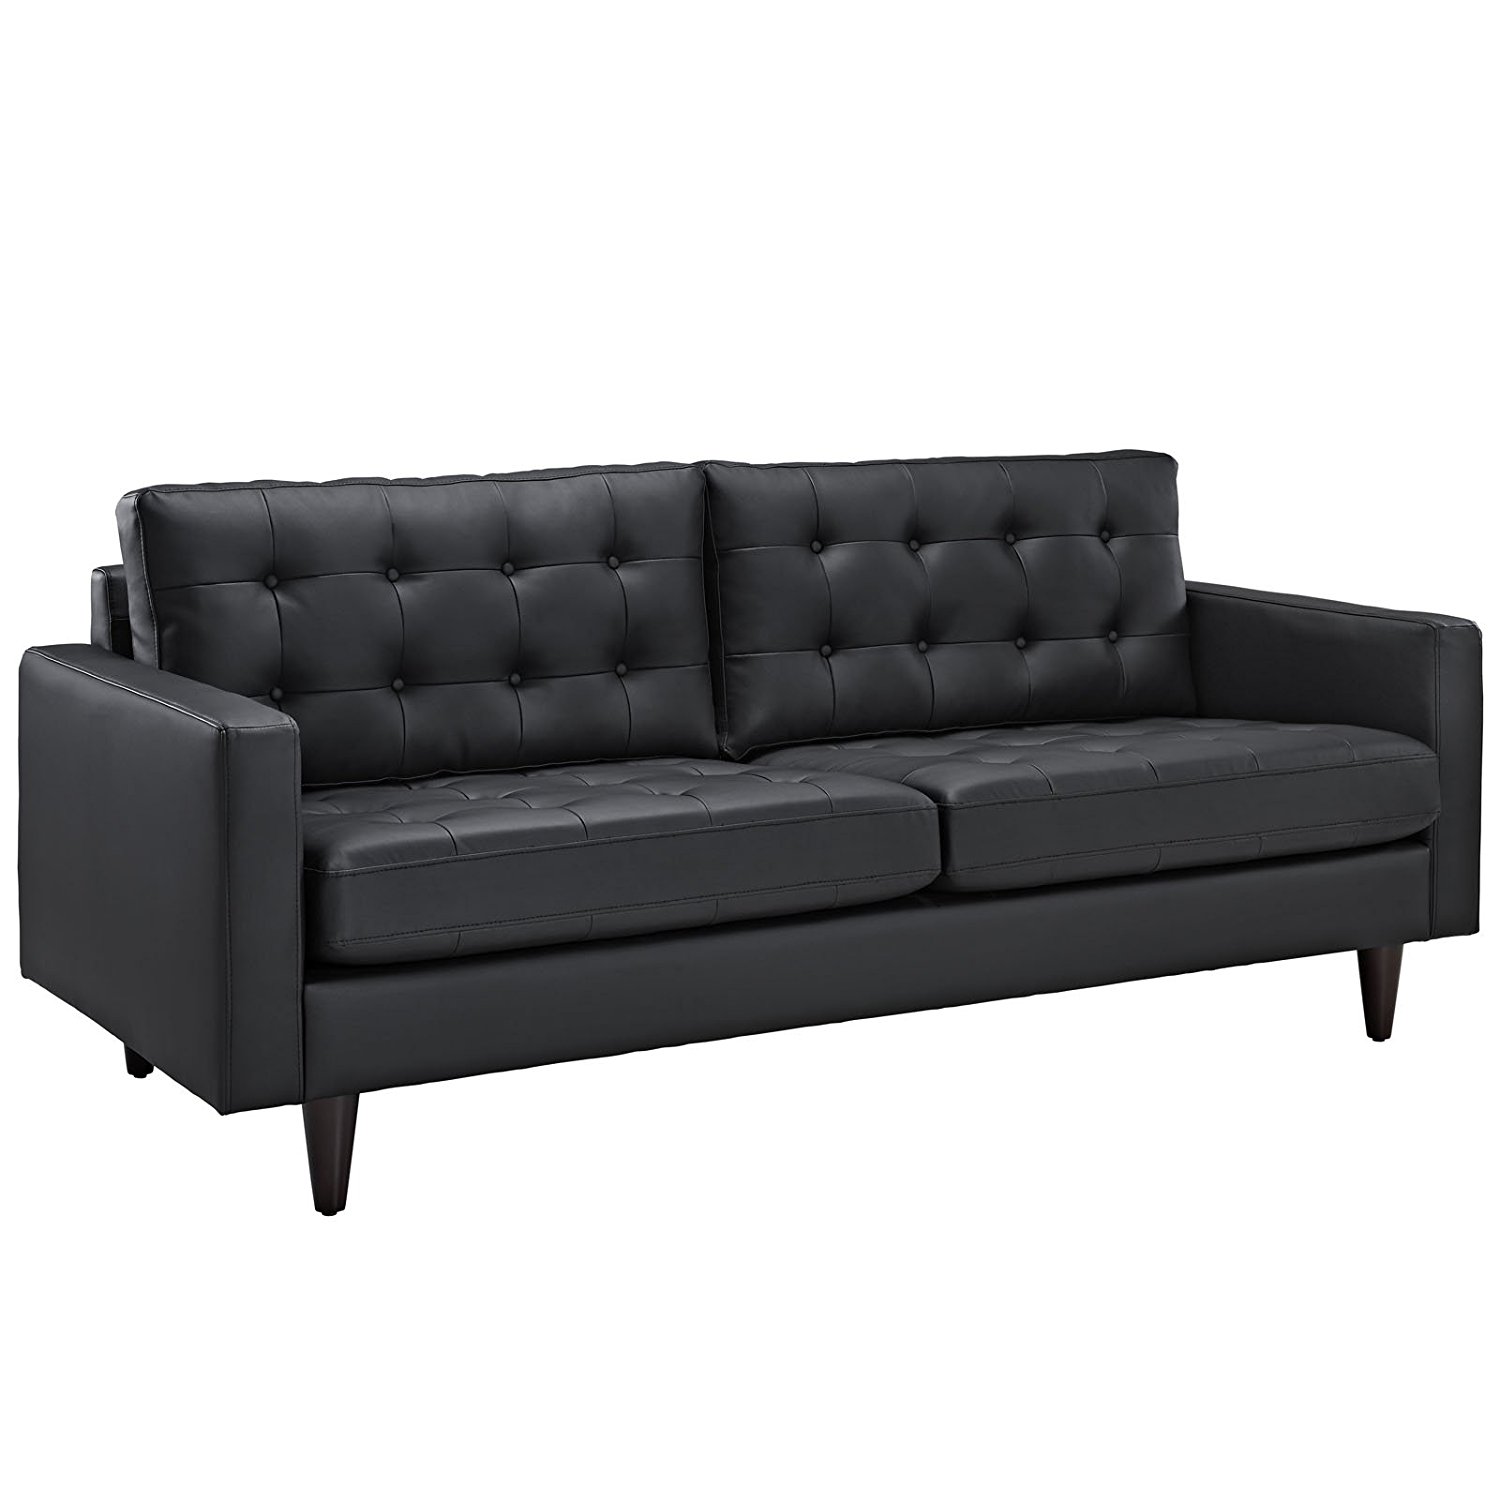 Modway Empress Mid-Century Modern Upholstered Leather Sofa In Black